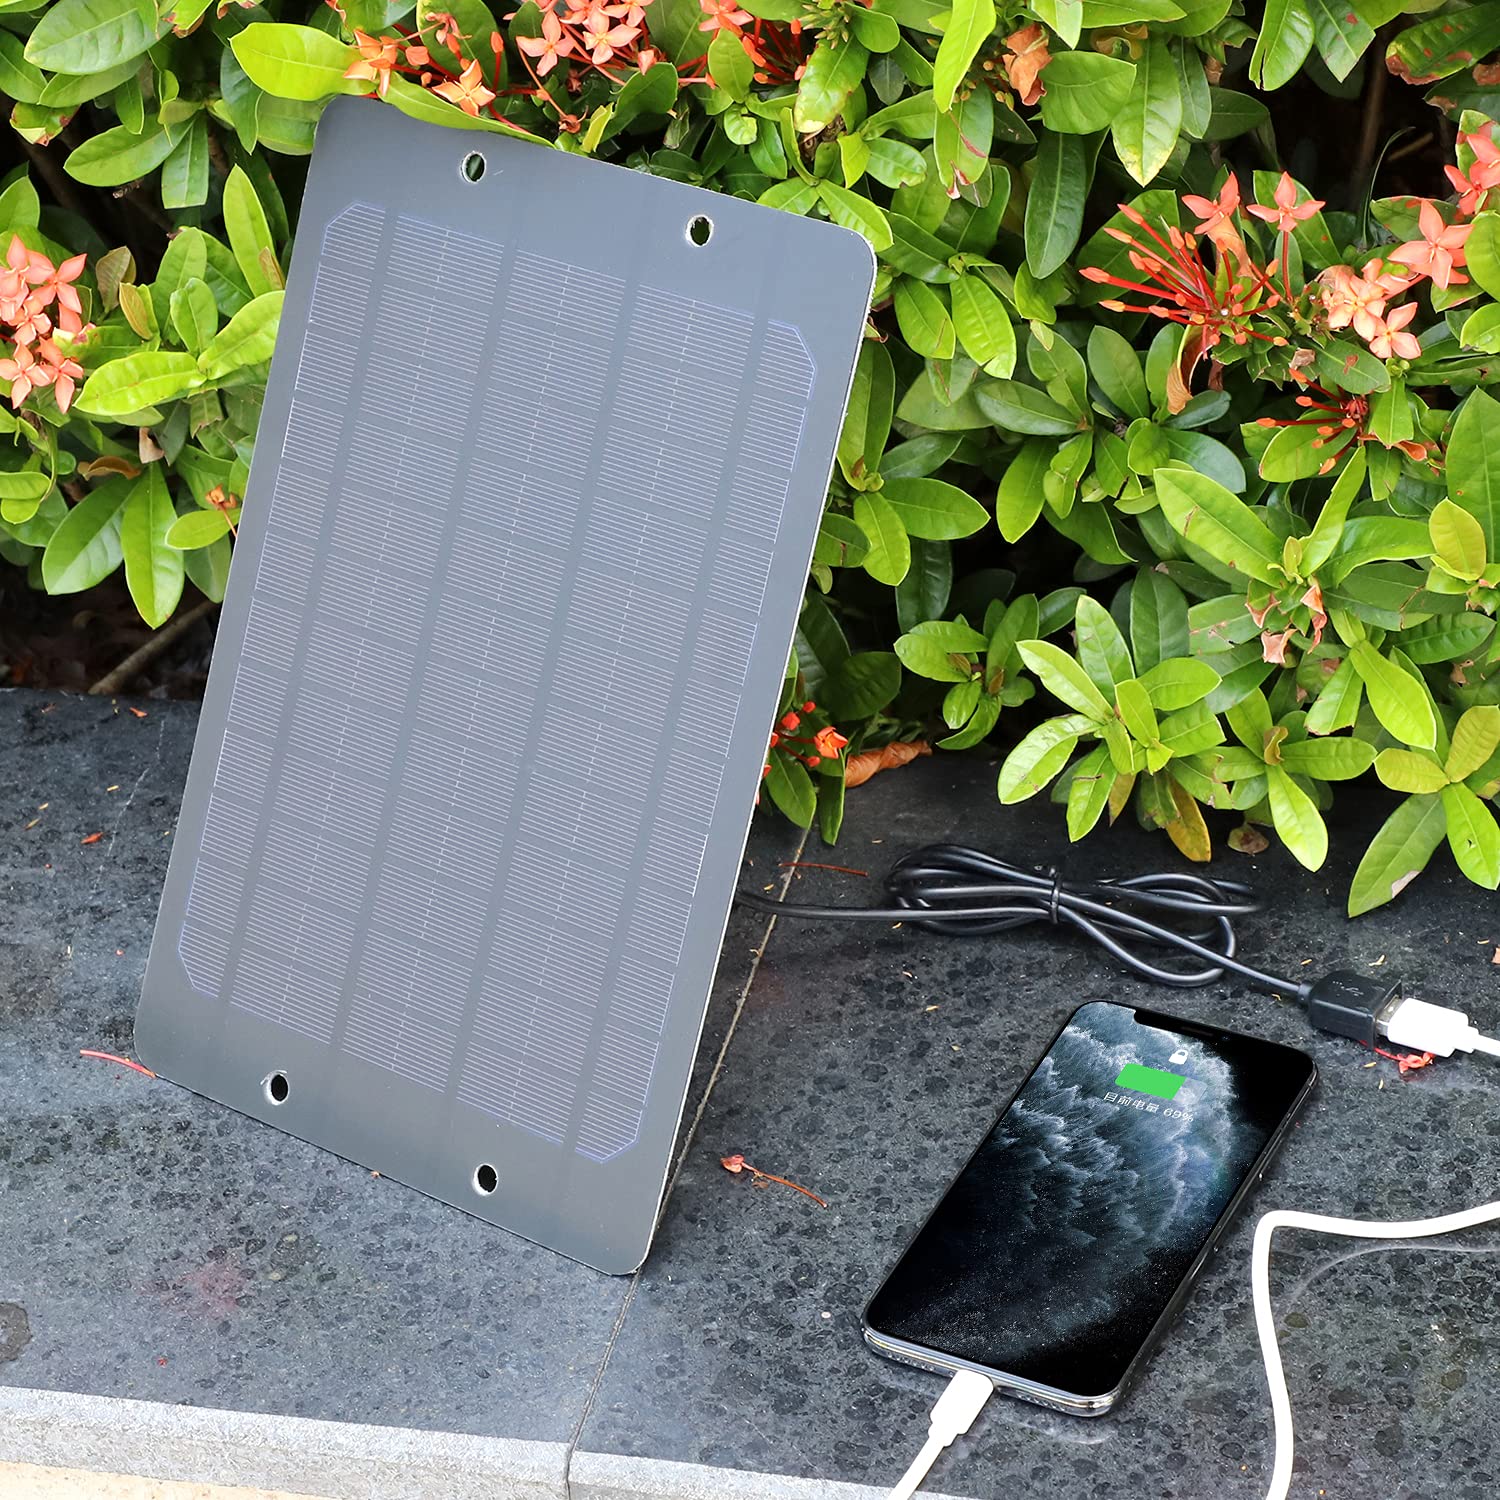 Soshine Mini Solar Panel - USB Solar Panel Charger 5v 6w with High Performance Monocrystalline for Camera,Water Pump,Small Fan,Bicycle,Power Bank,Camping Lanterns